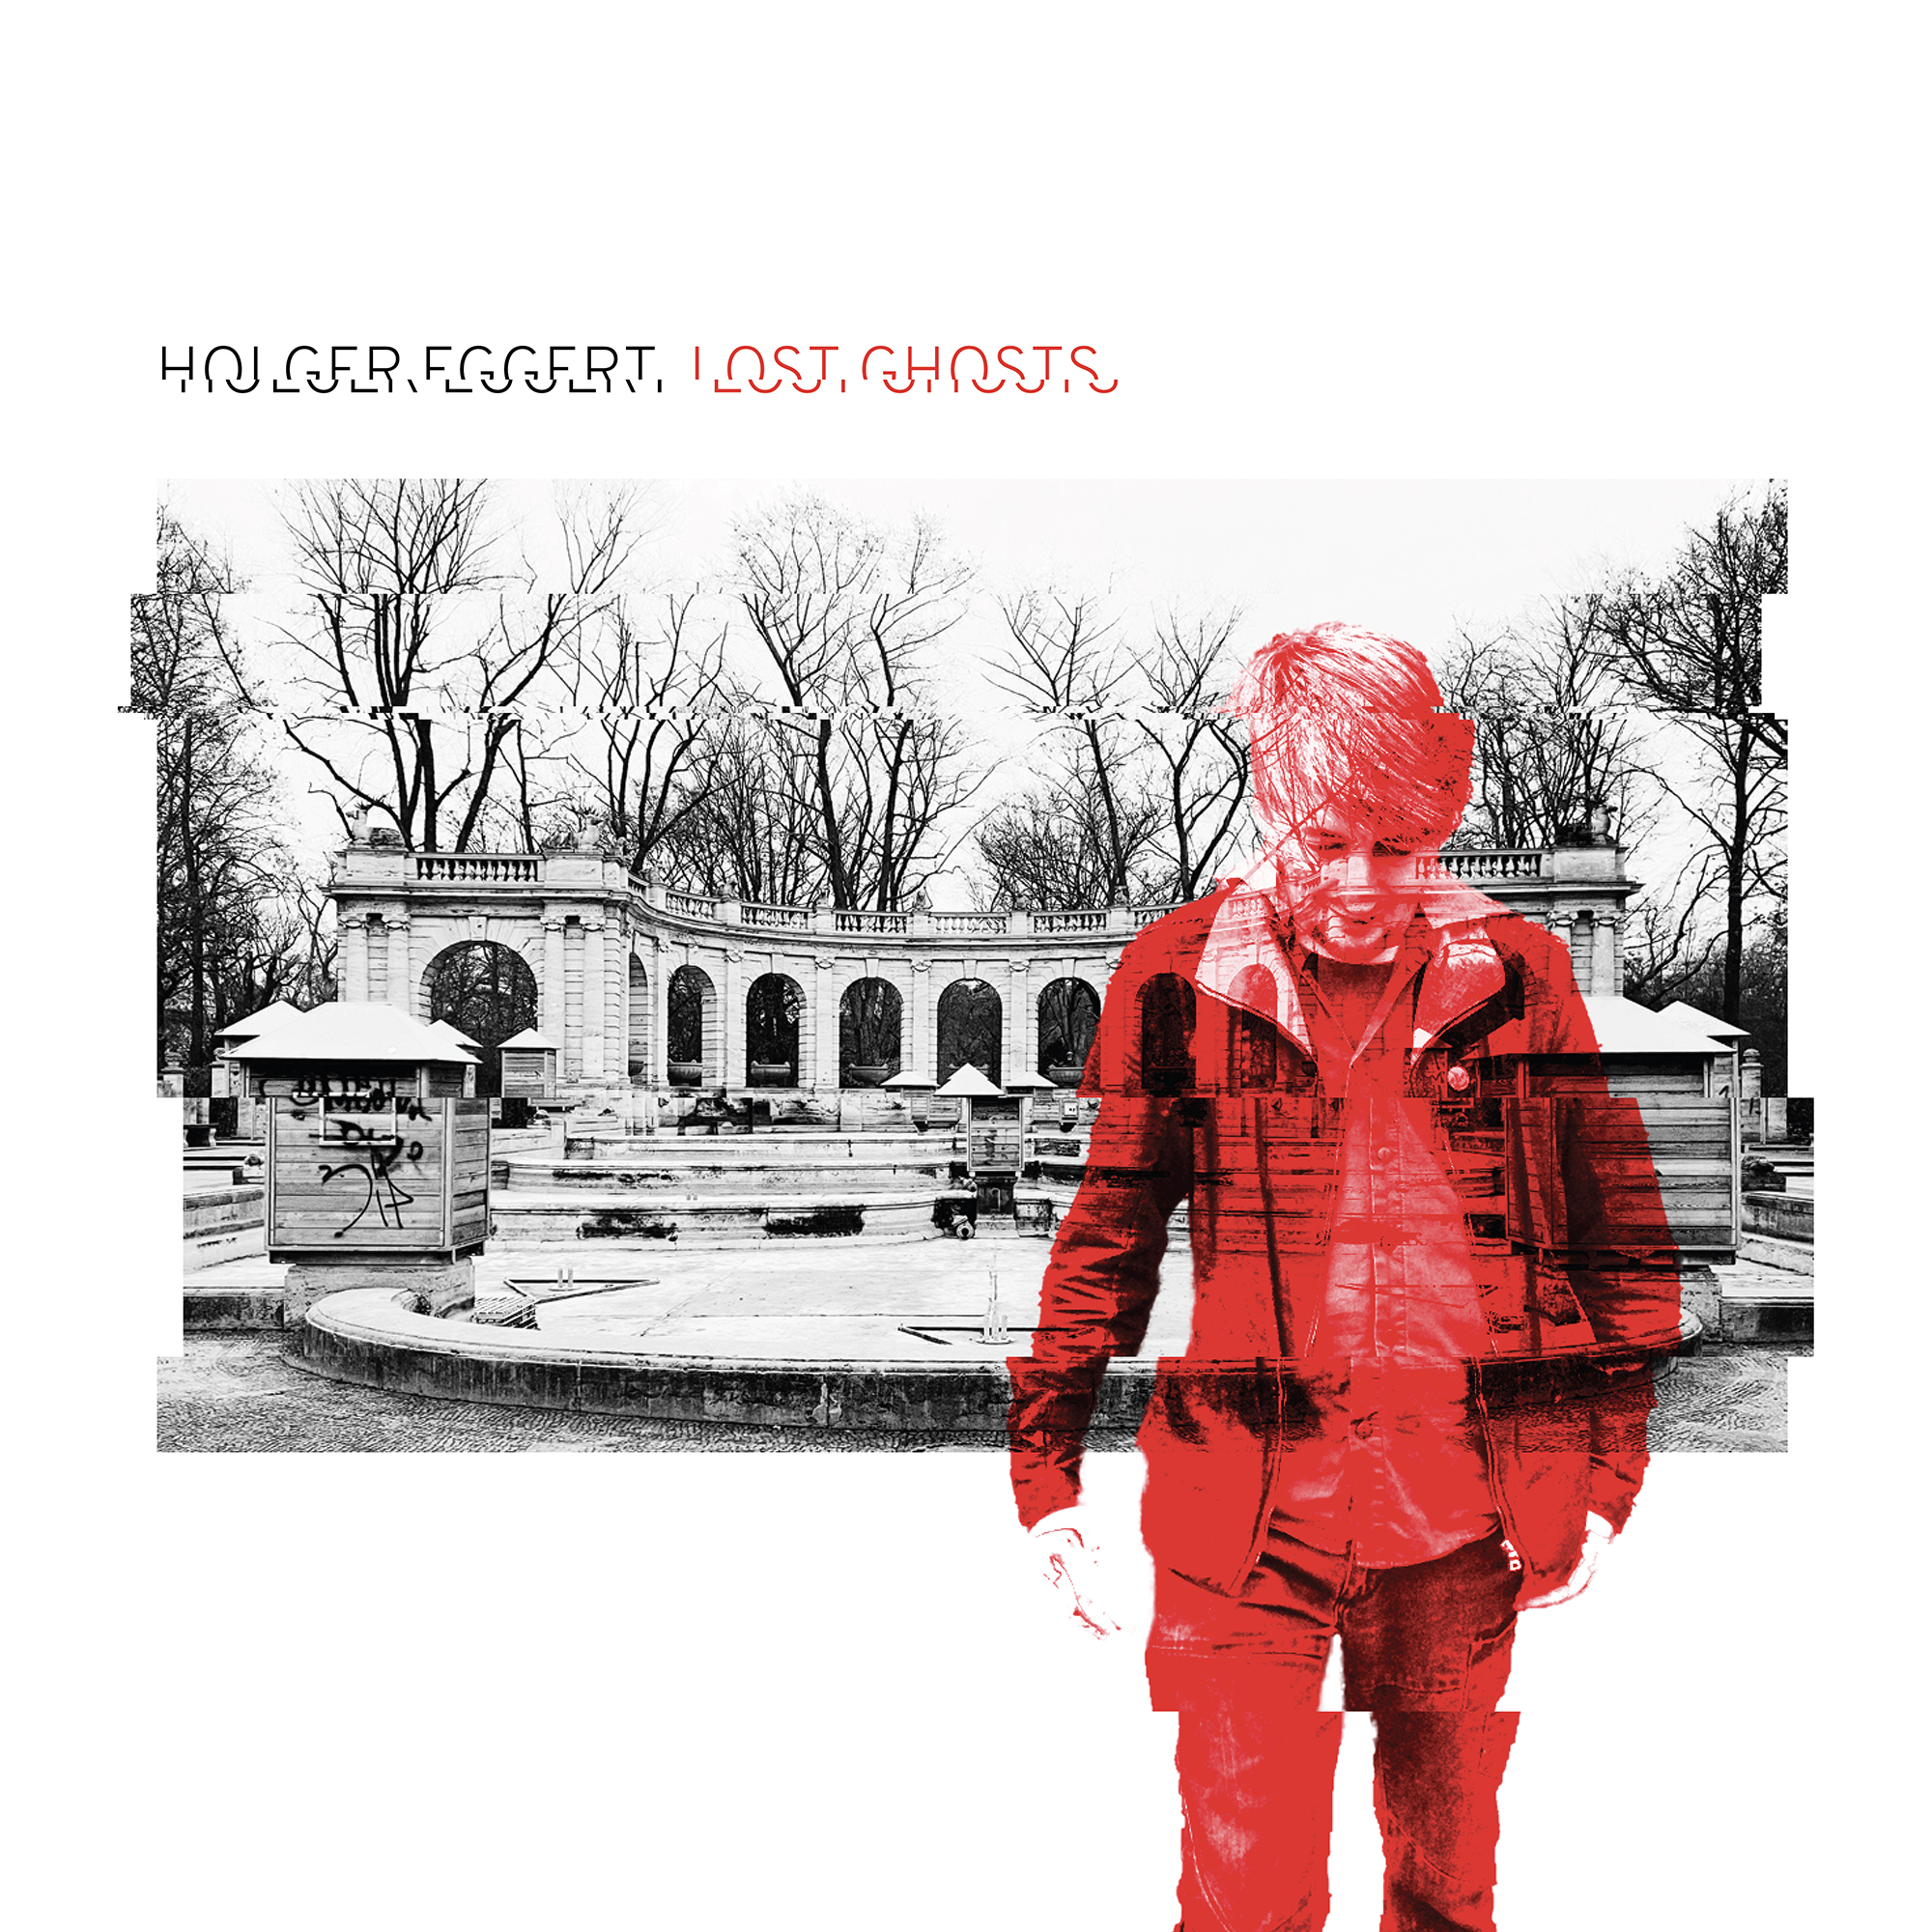 Lost Ghosts (front cover)